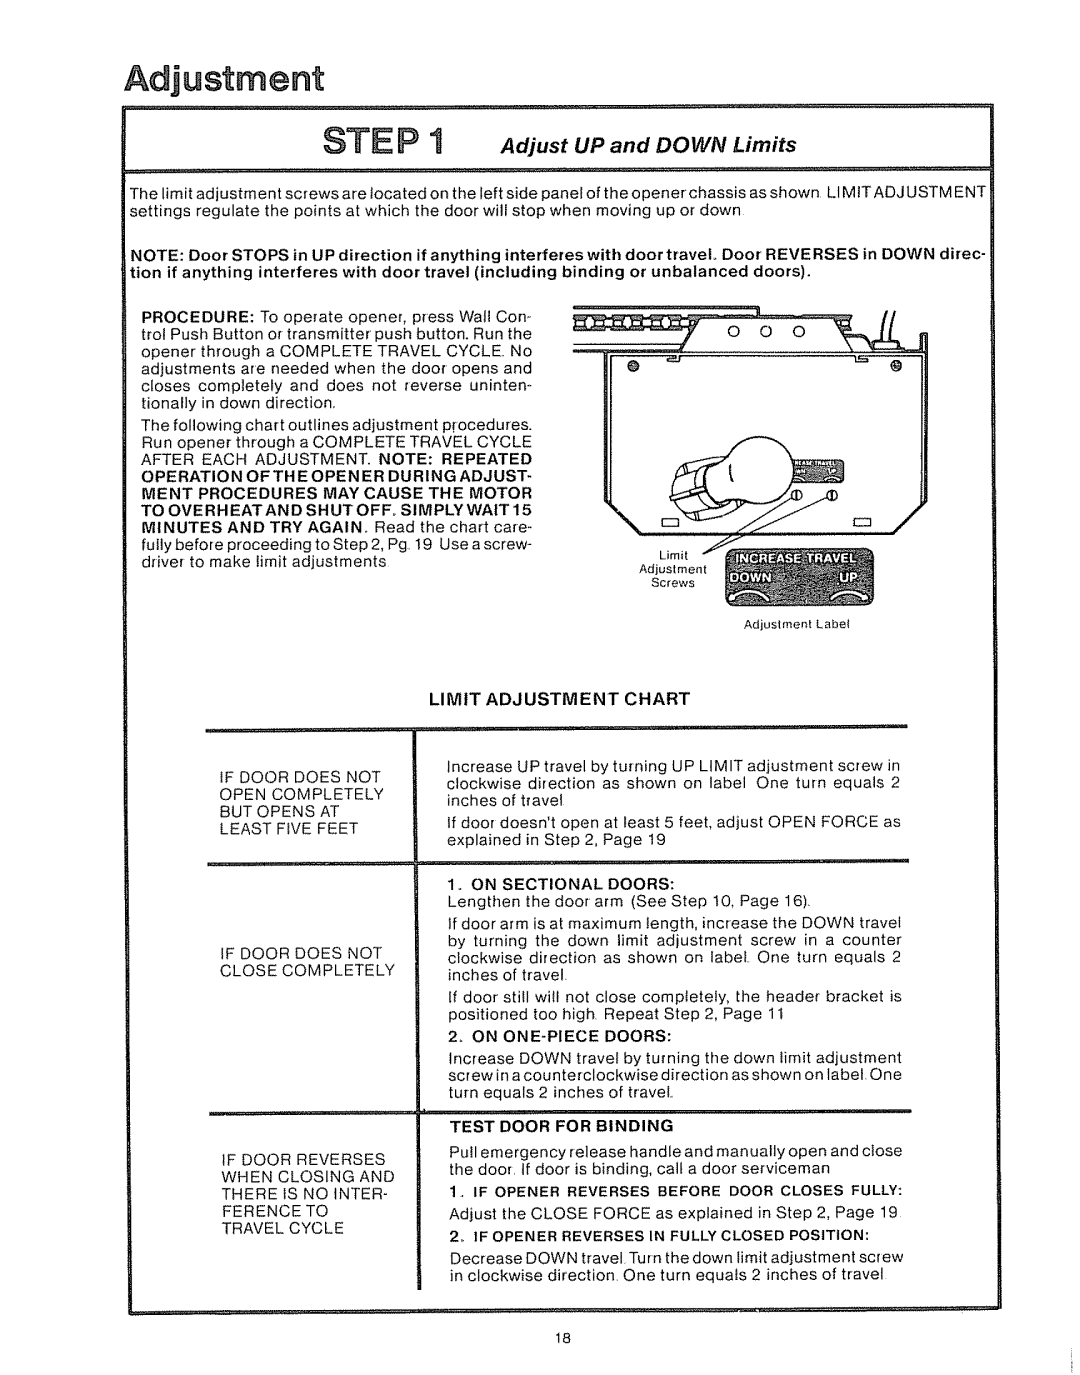 Craftsman 39535006 specifications Adjust UP and DOWN Limits, Limit Adjustment Chart 